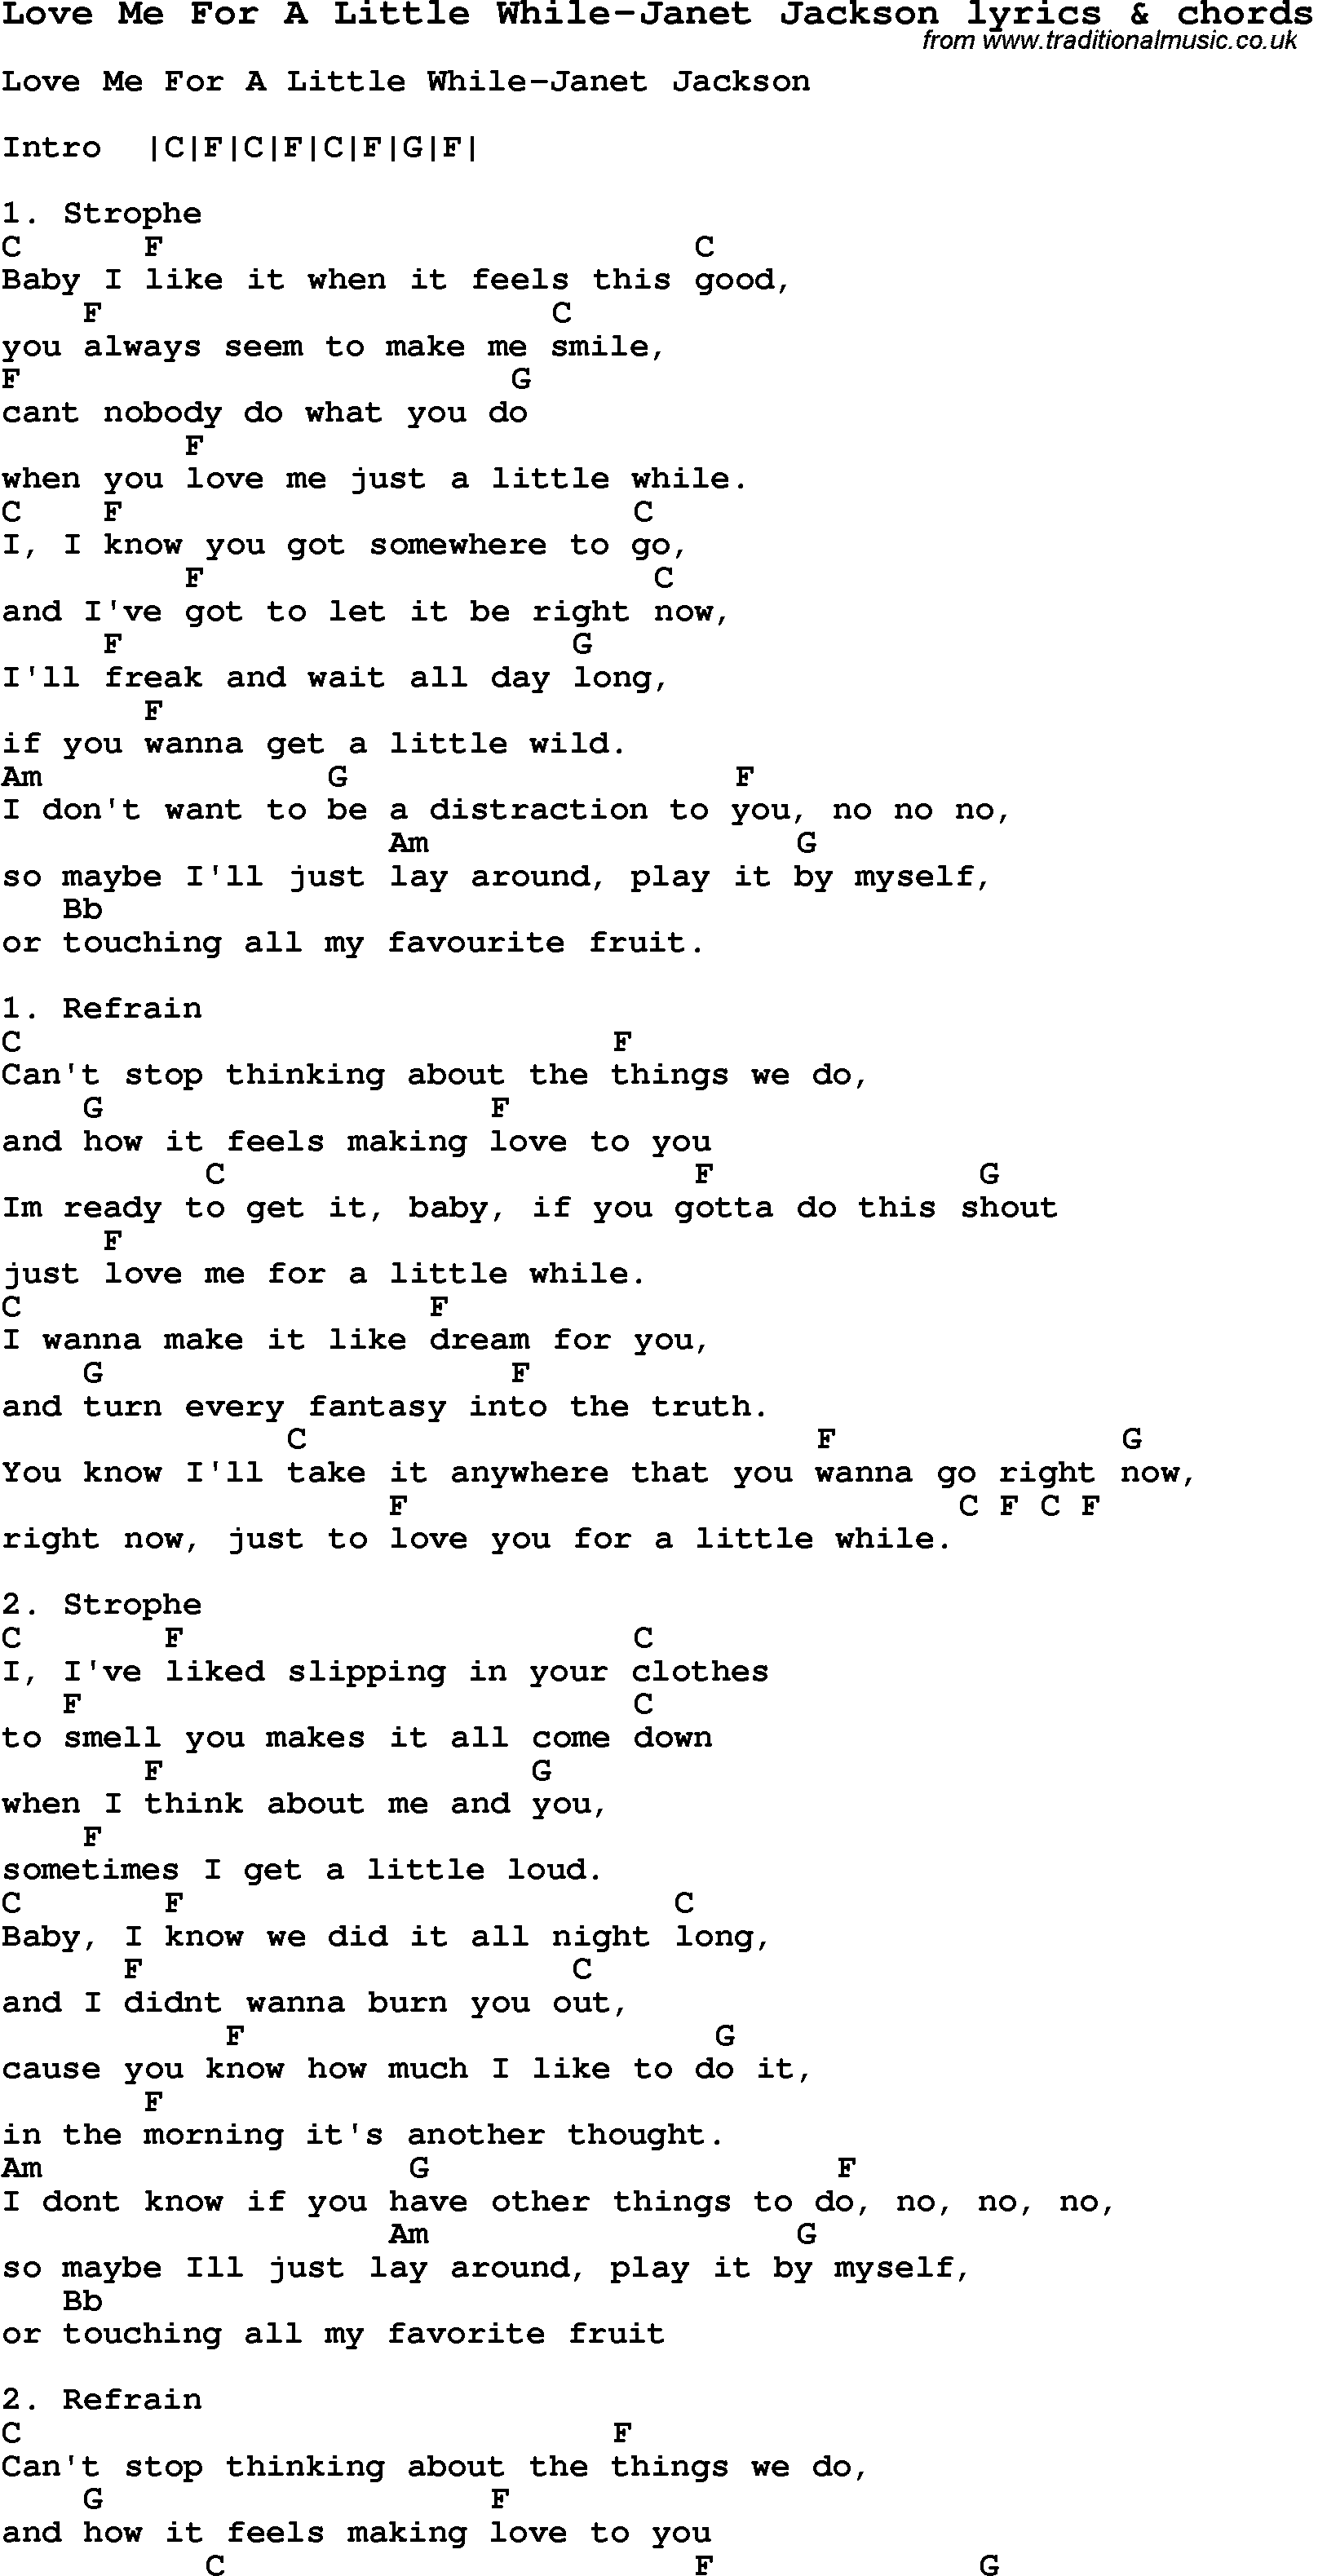 Love Song Lyrics for: Love Me For A Little While-Janet Jackson with chords for Ukulele, Guitar Banjo etc.